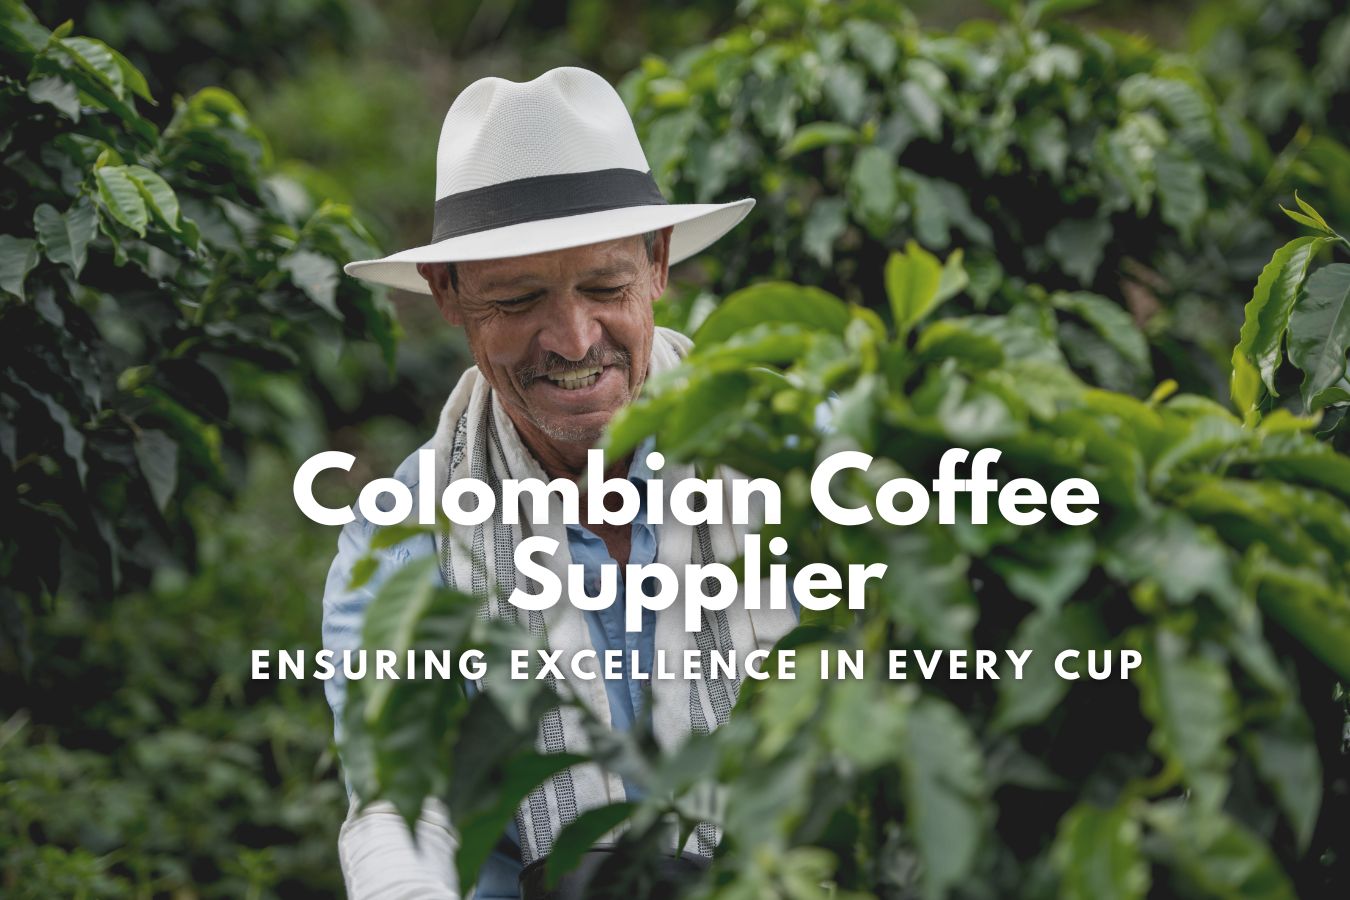 Colombian Coffee Supplier Ensuring Excellence in Every Cup